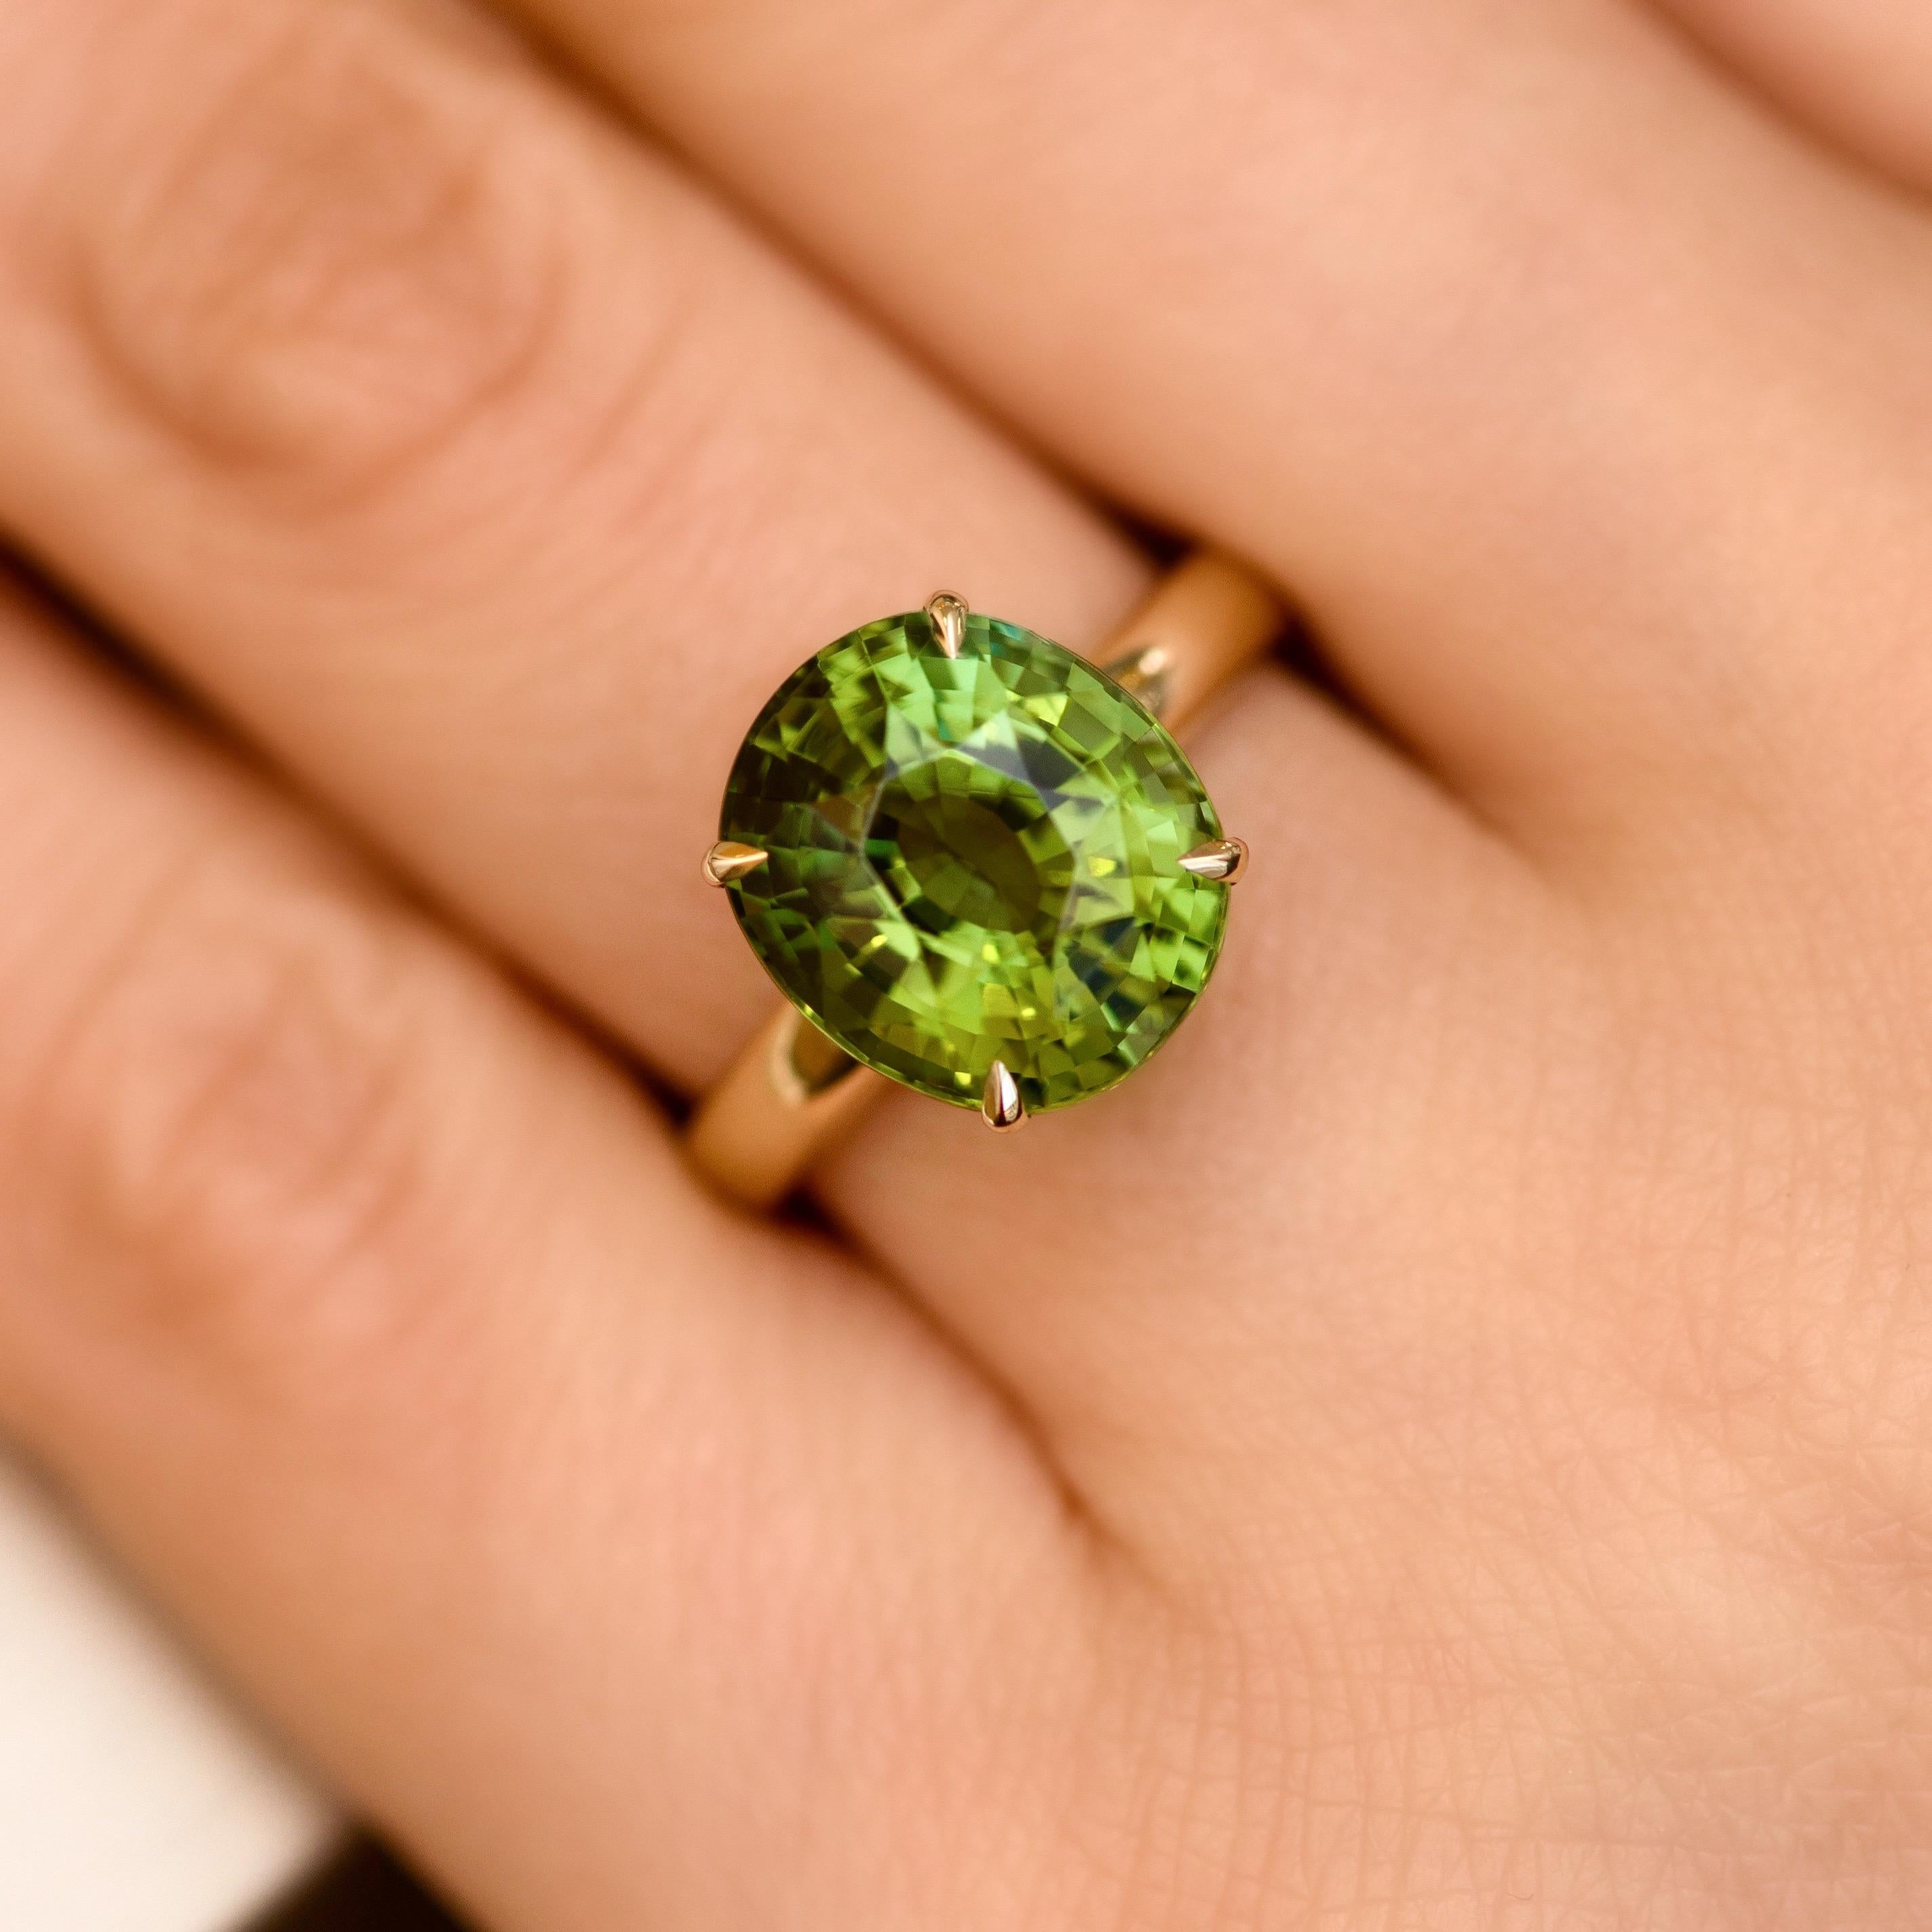 Green tourmaline - verdelite in a frame of yellow gold. 
Tourmalines usually have mix of different shades inside one stone. 
This one has severals shades of green color. 
Classical cut plus elegant ring is more than enough for such interesting